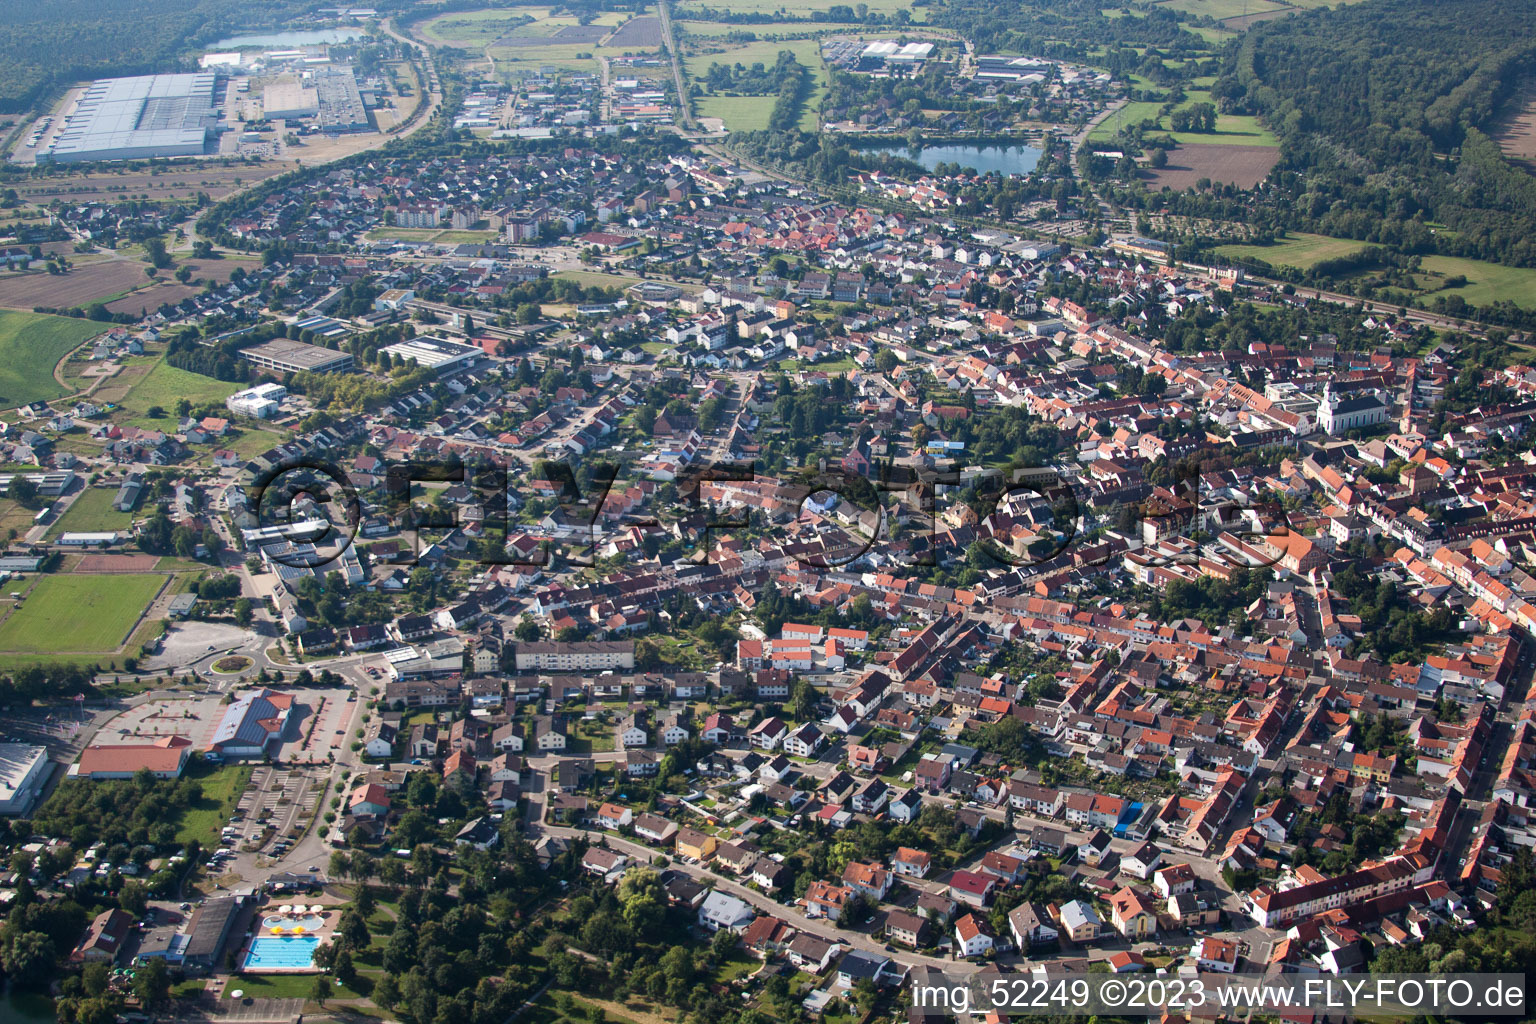 Philippsburg in the state Baden-Wuerttemberg, Germany seen from above